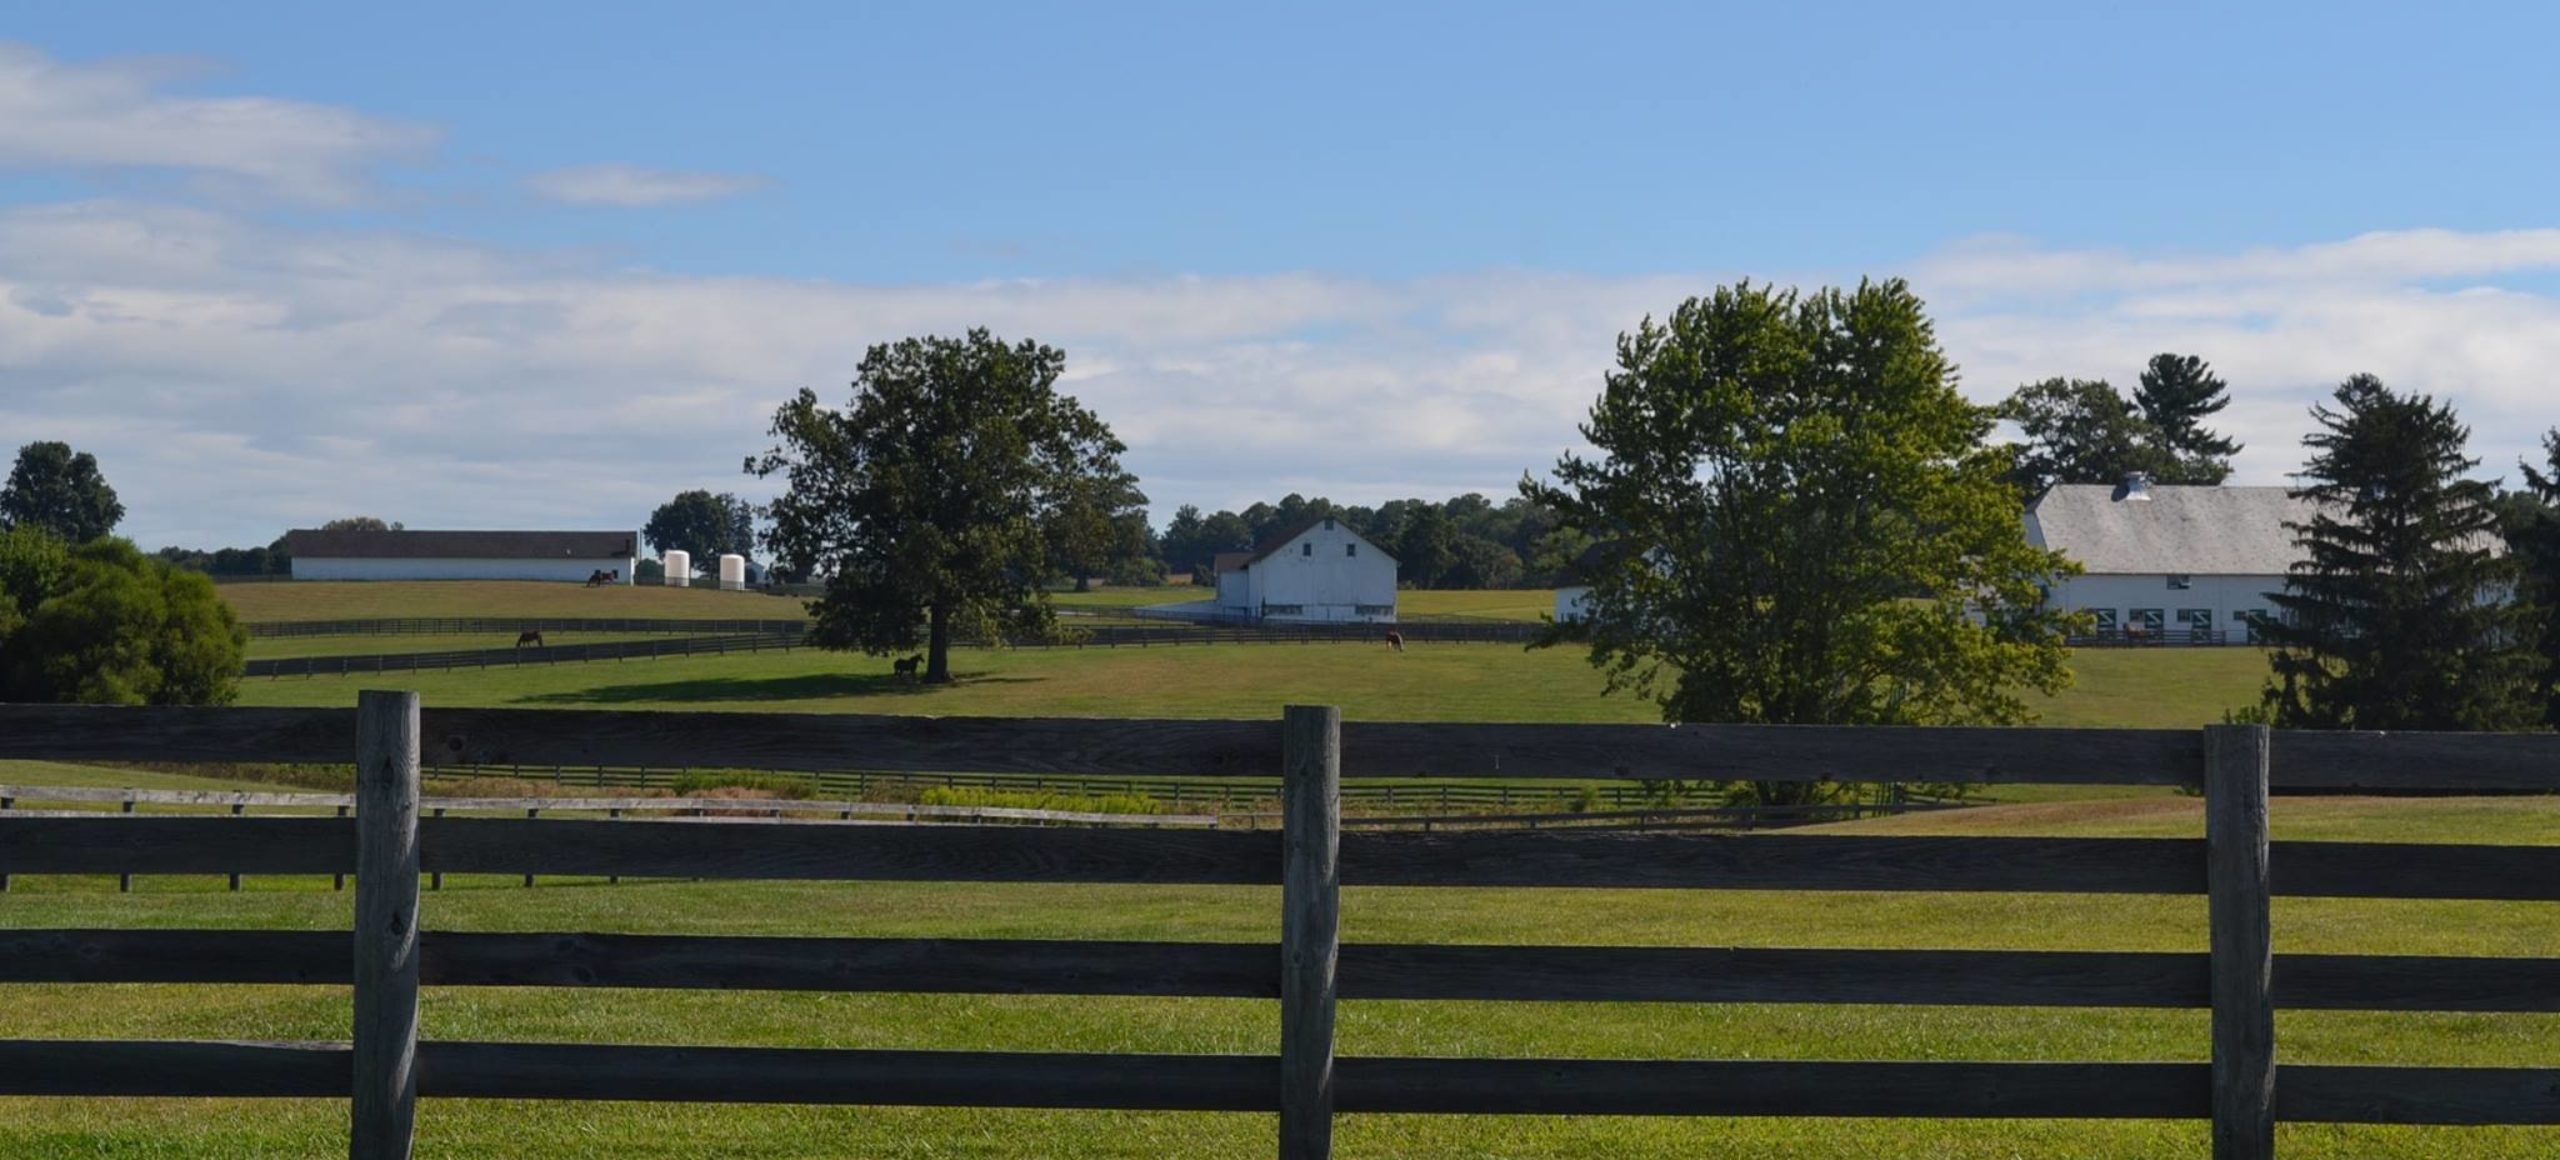 Blue skies over a pastoral farm with a split rail fence in the foreground.